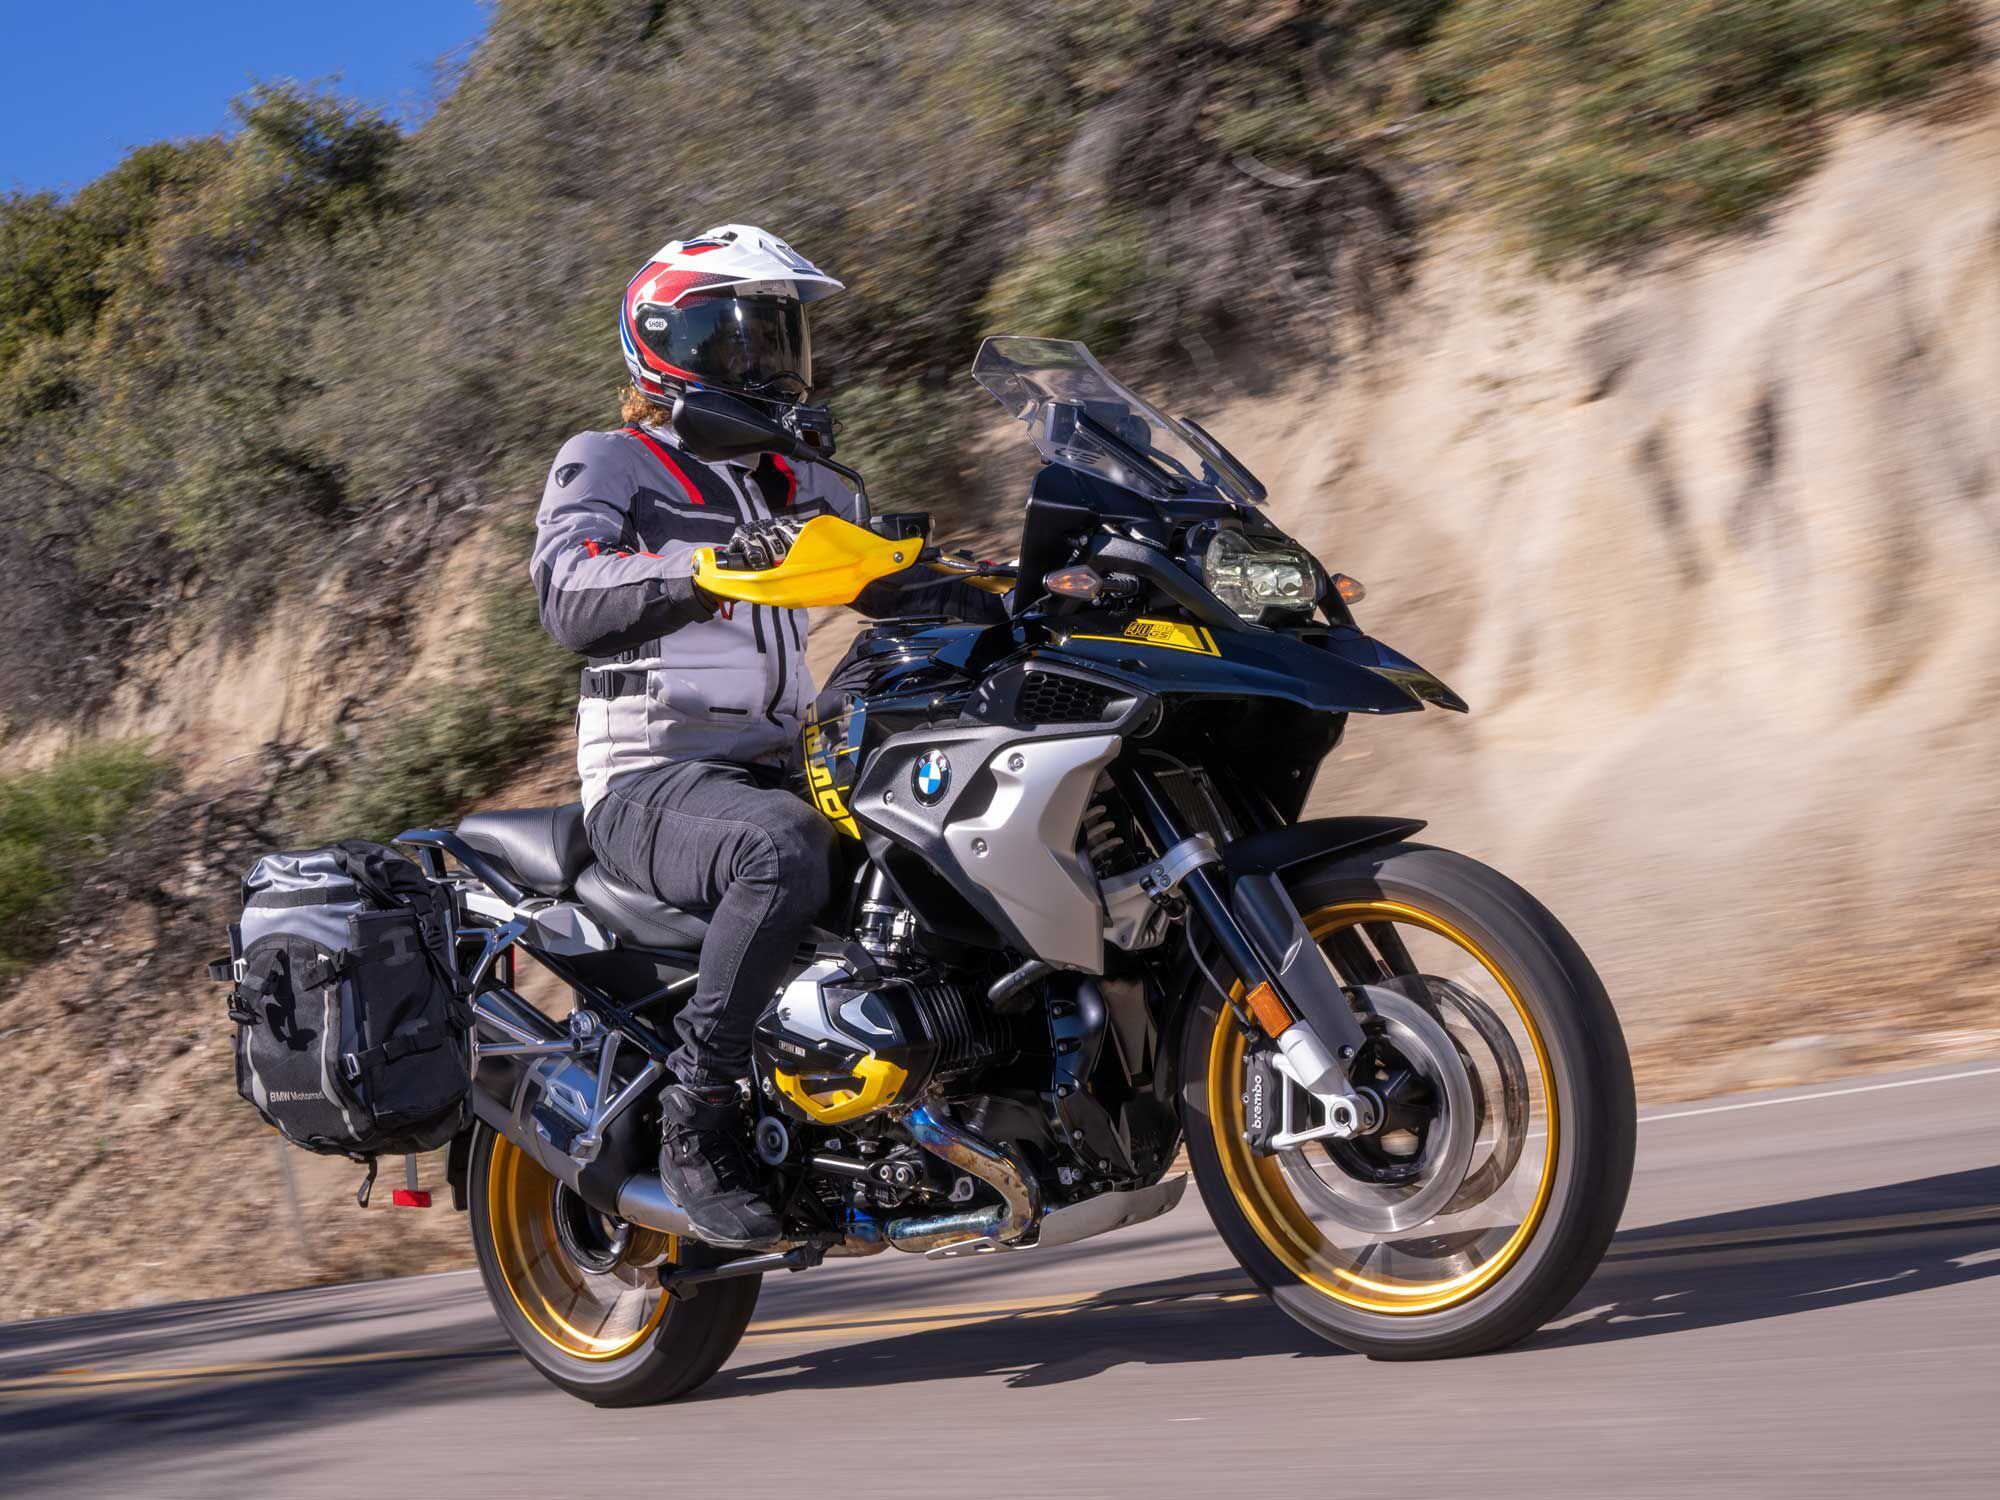 Miles melt away with ease aboard the 2021 BMW R 1250 GS adventure bike.